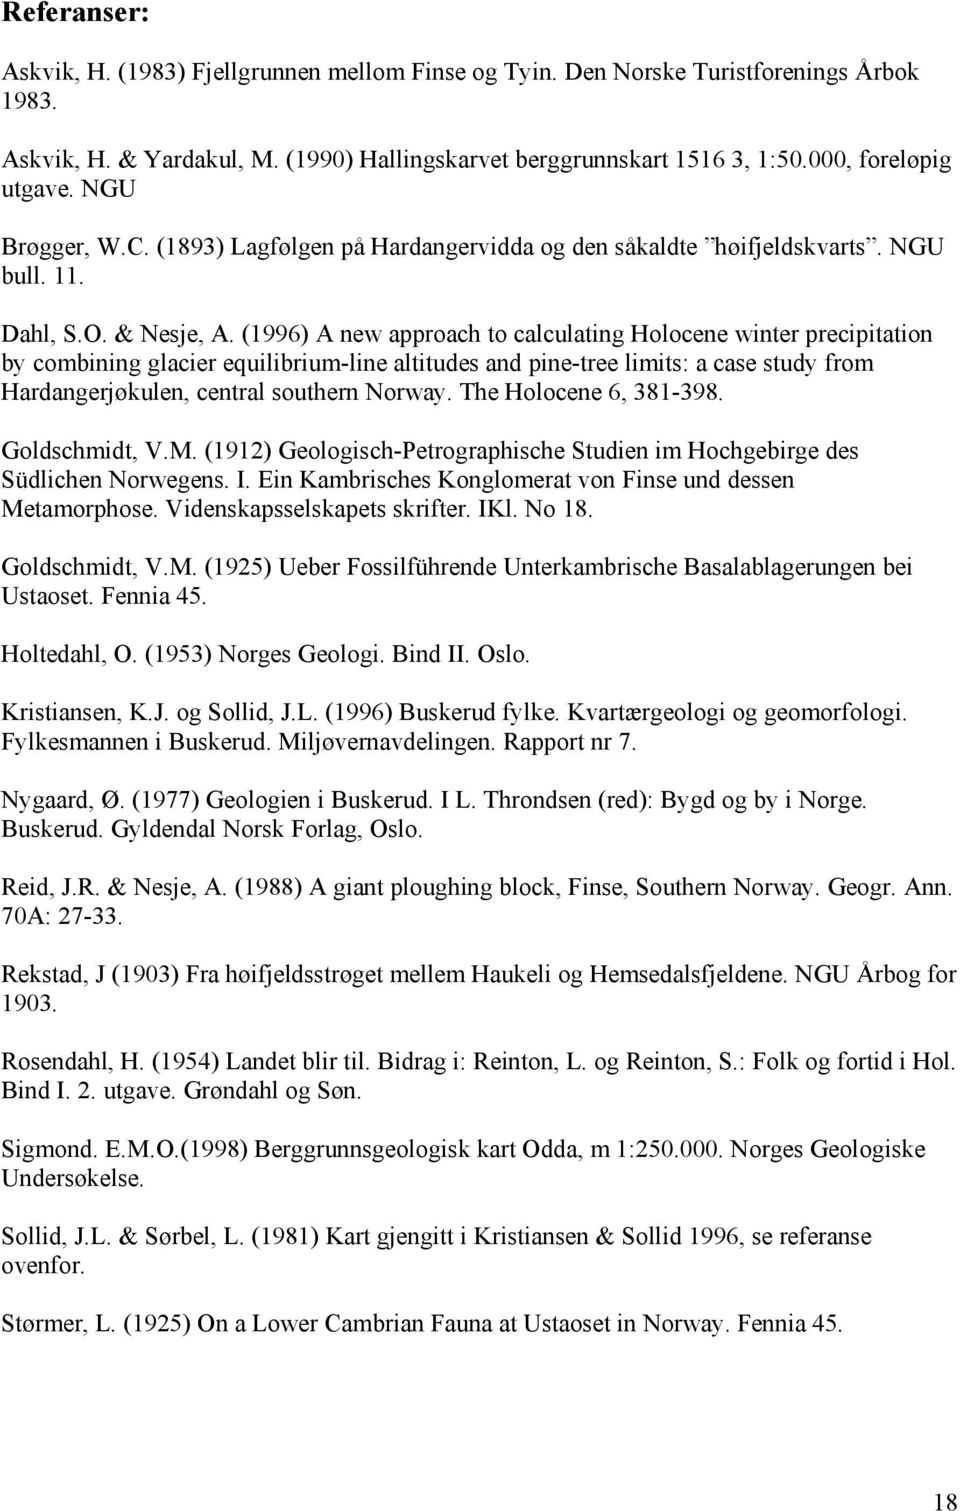 (1996) A new approach to calculating Holocene winter precipitation by combining glacier equilibrium-line altitudes and pine-tree limits: a case study from Hardangerjøkulen, central southern Norway.